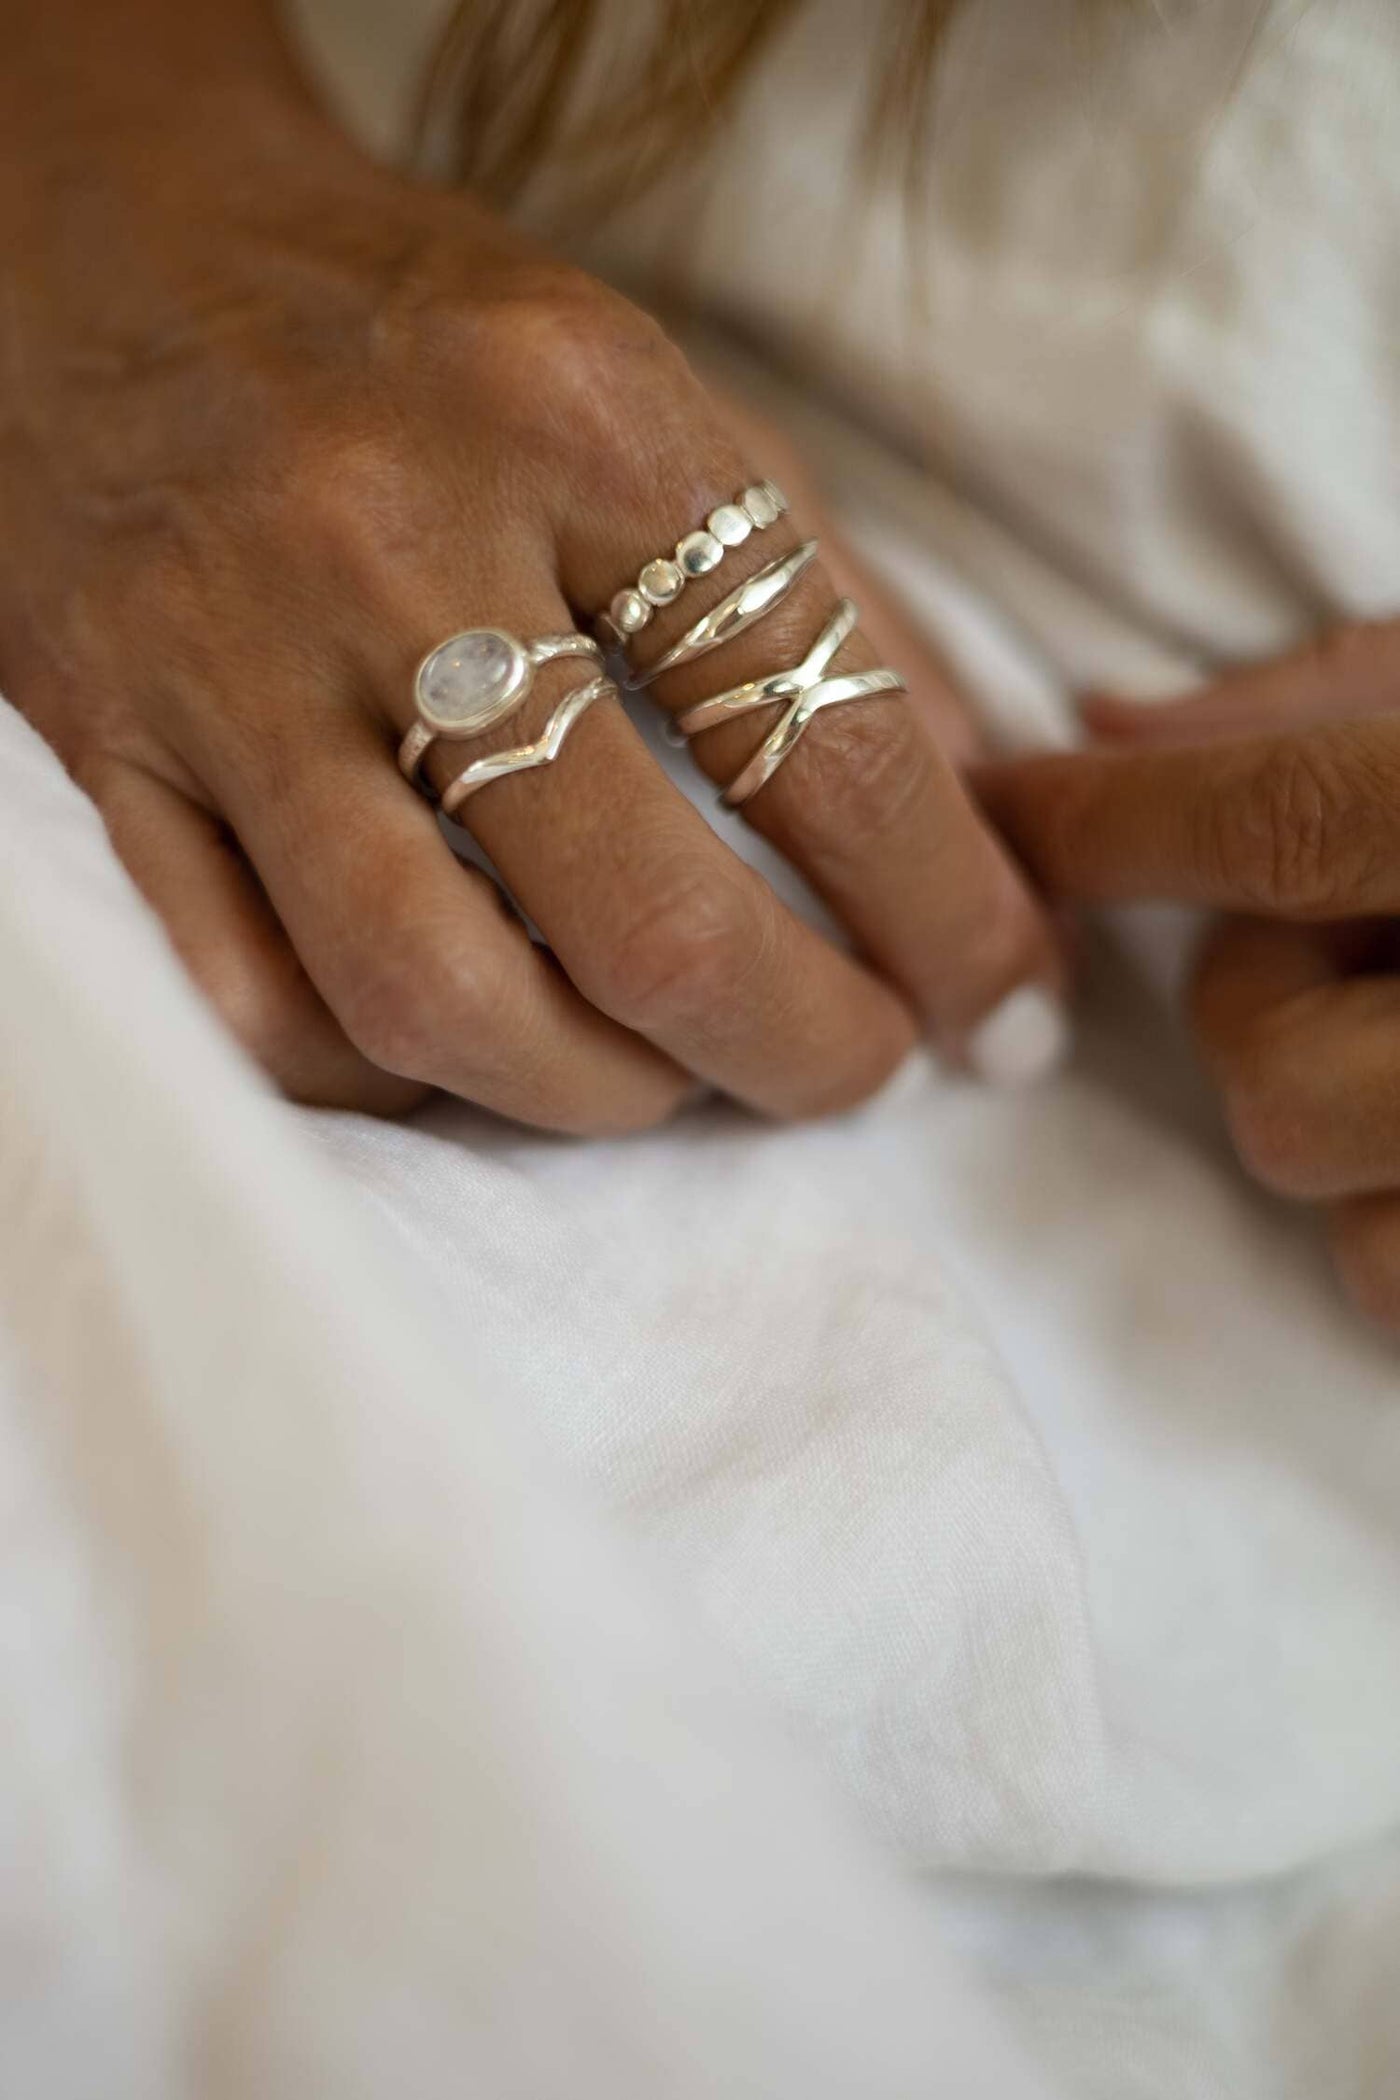 Classic Moonstone Ring Match with Other Silver Rings